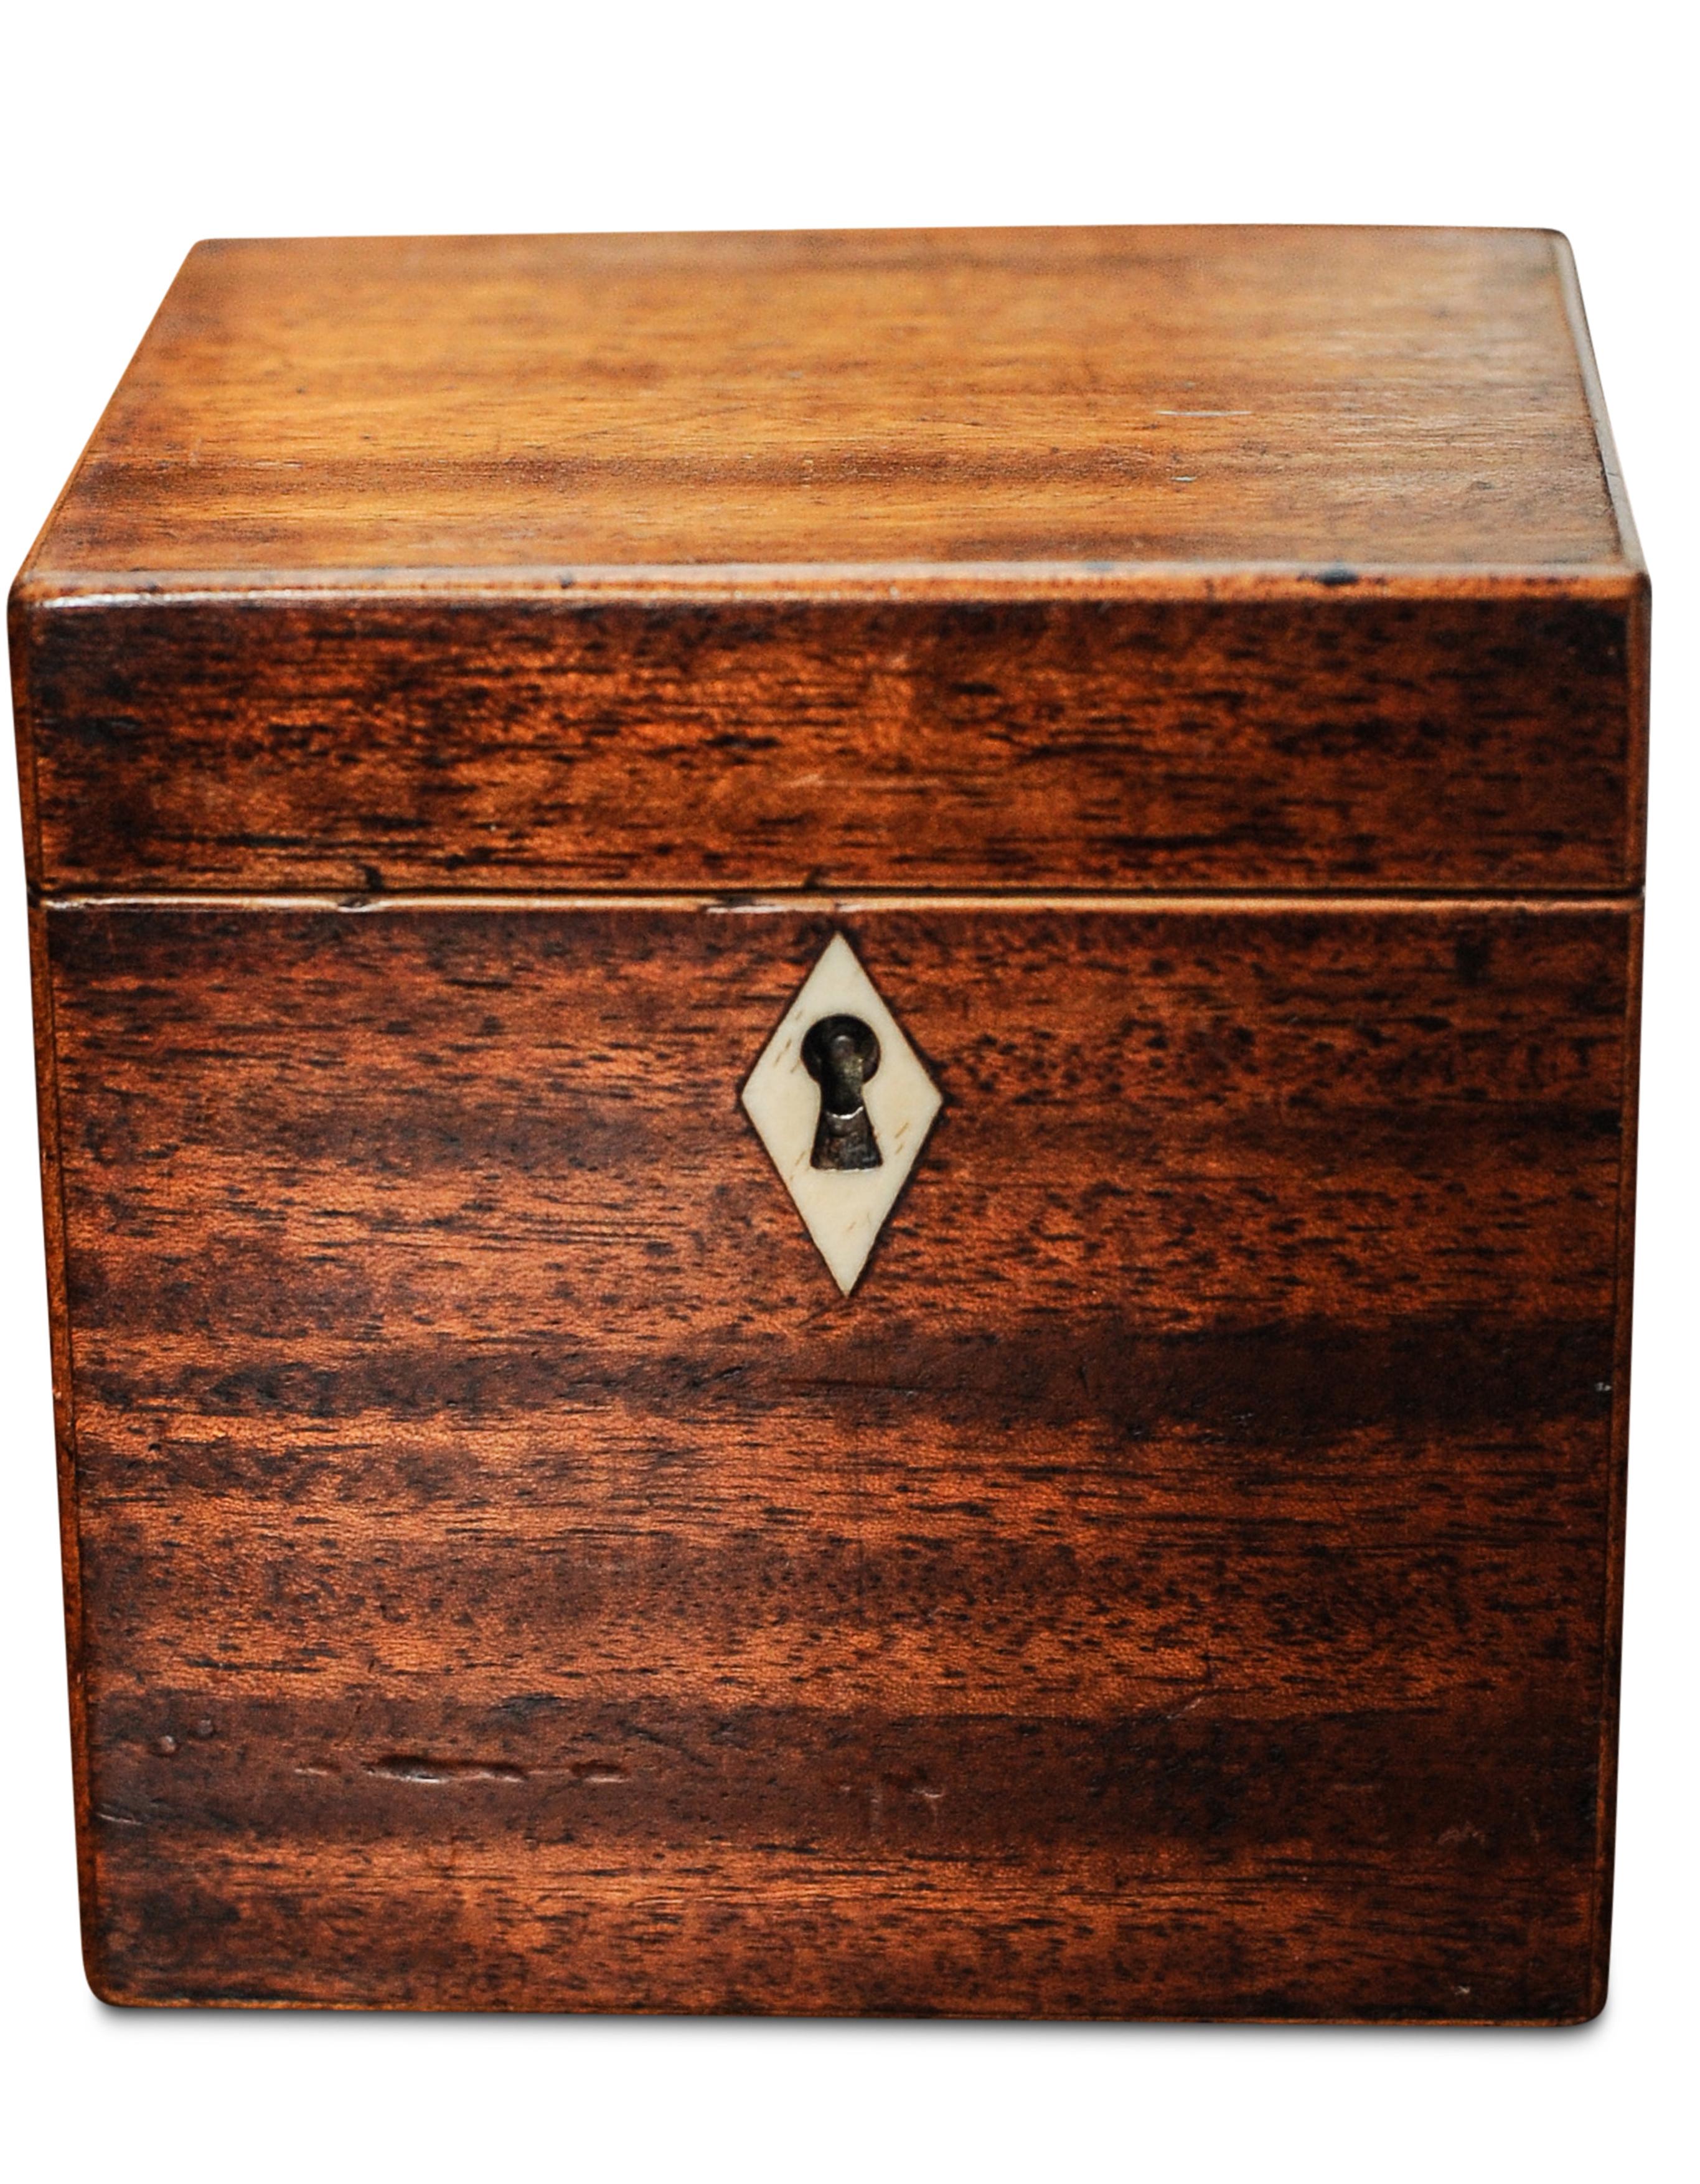 A Handmade Victorian Fruitwood & Inlay Tea Caddy With Zinc Lining

A tea caddy is a box, jar, canister, or other receptacle used to store tea. When first introduced to Europe from Asia, tea was extremely expensive, and kept under lock and key. The